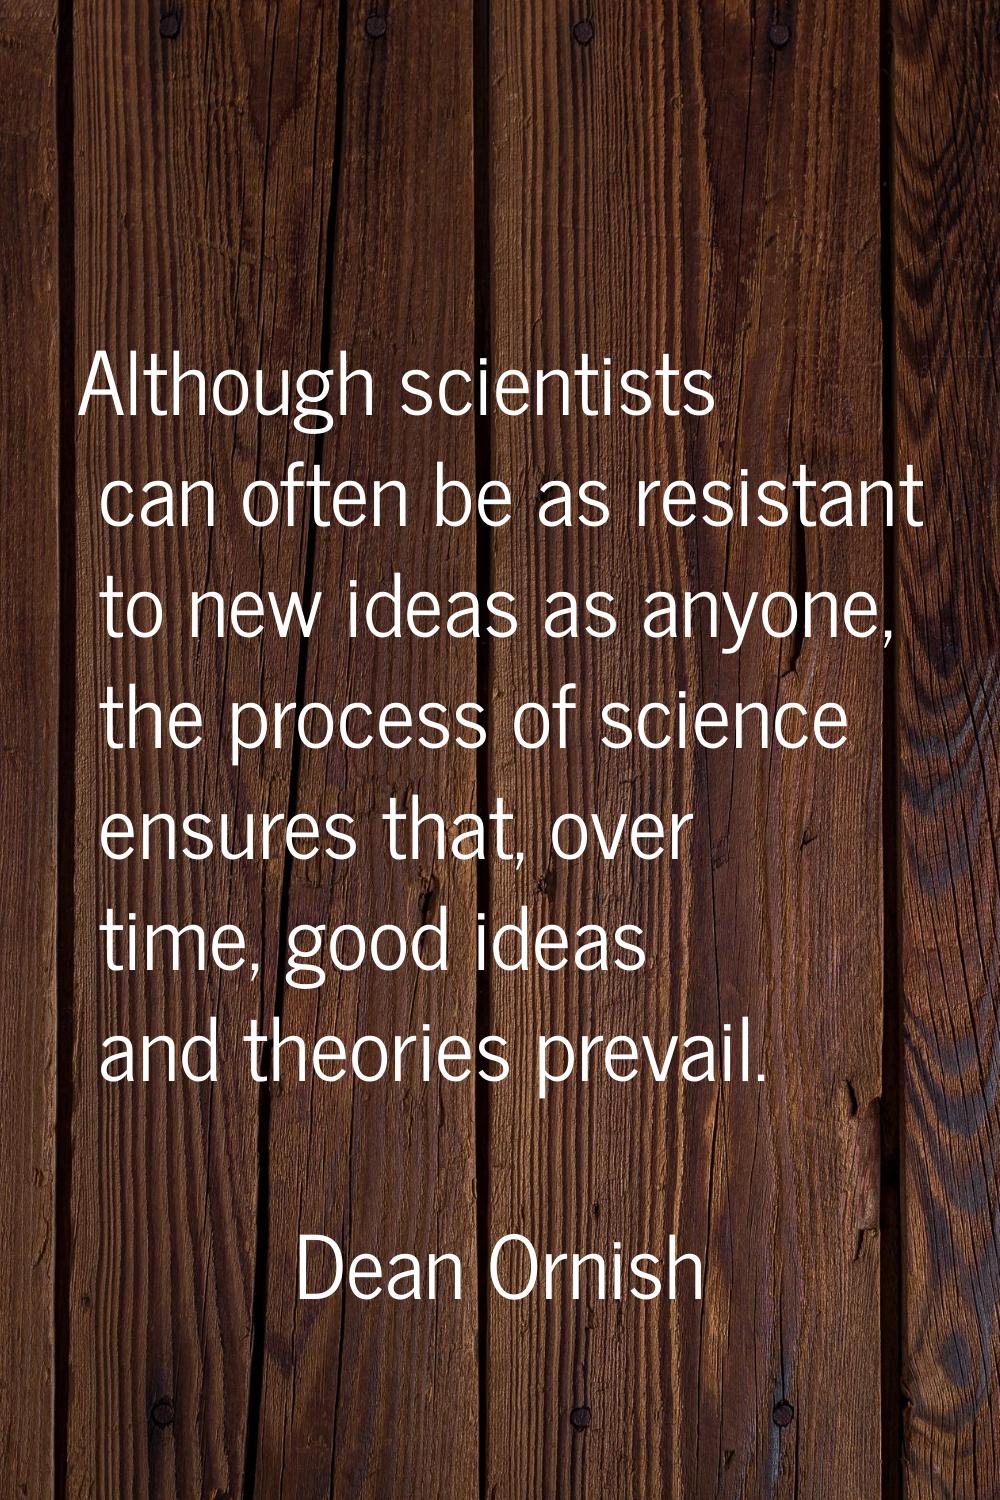 Although scientists can often be as resistant to new ideas as anyone, the process of science ensure